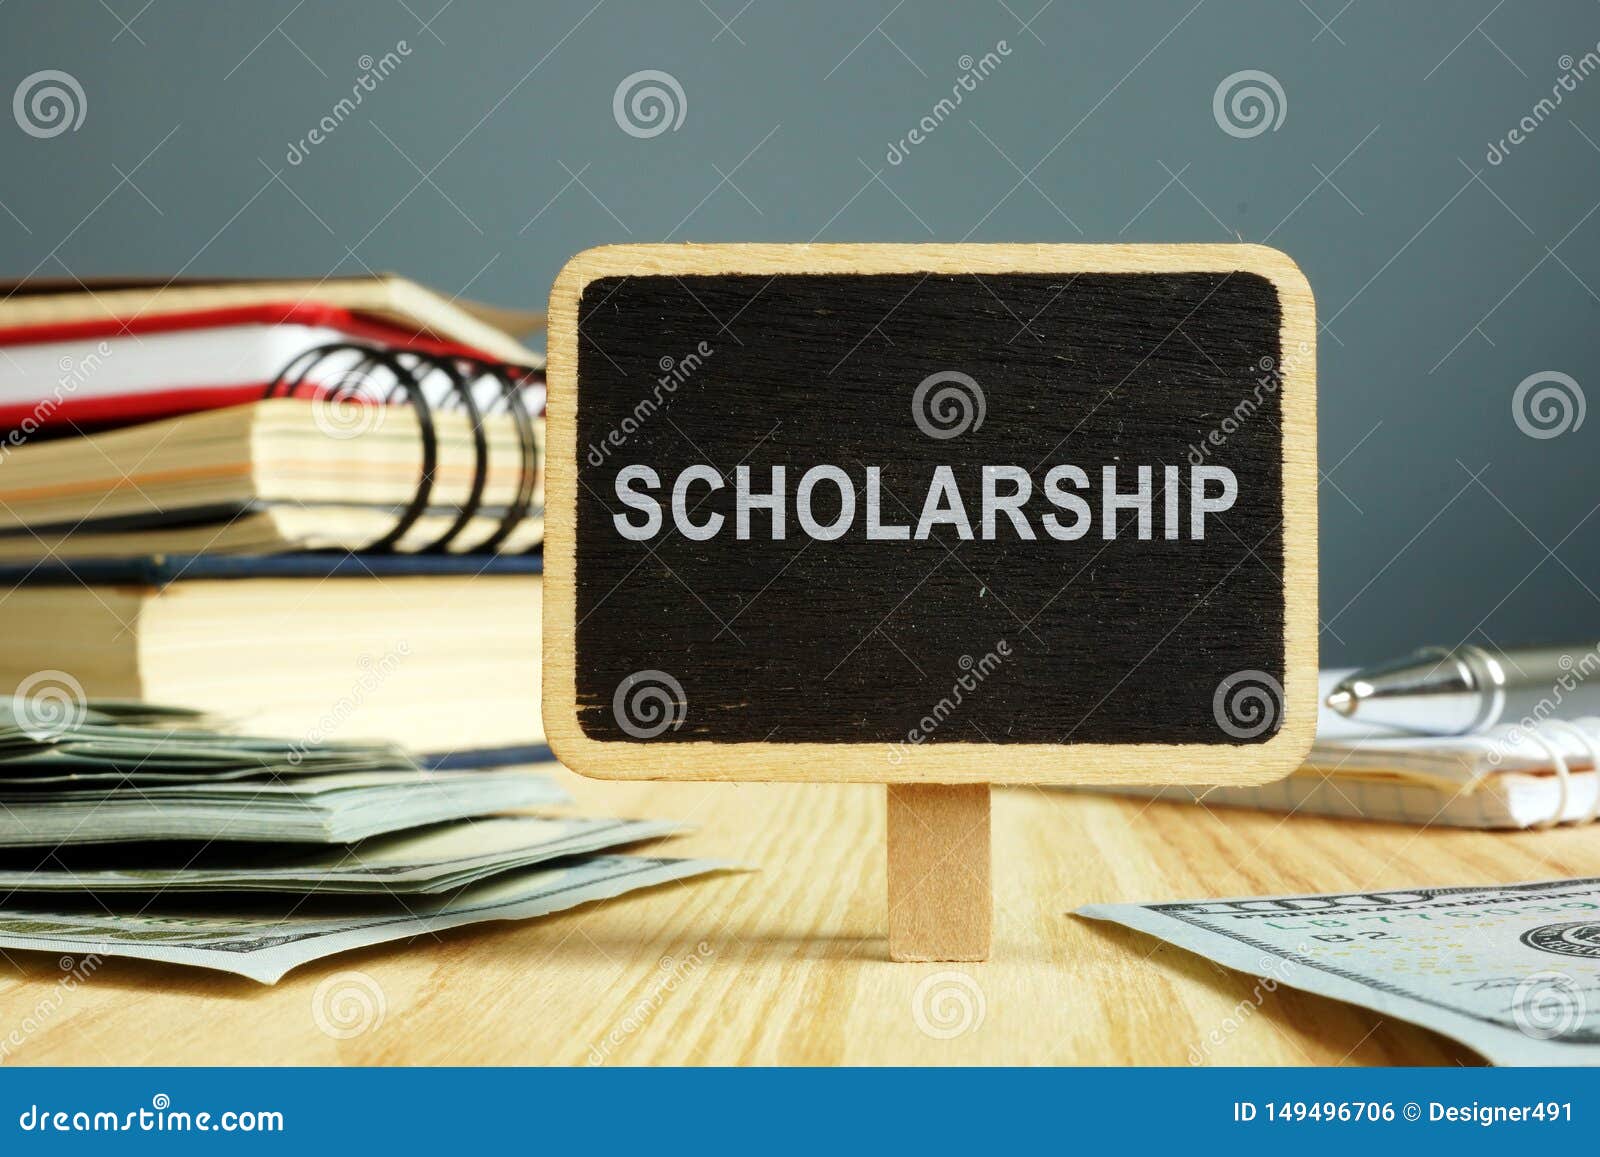 scholarship concept. notebooks and money for education